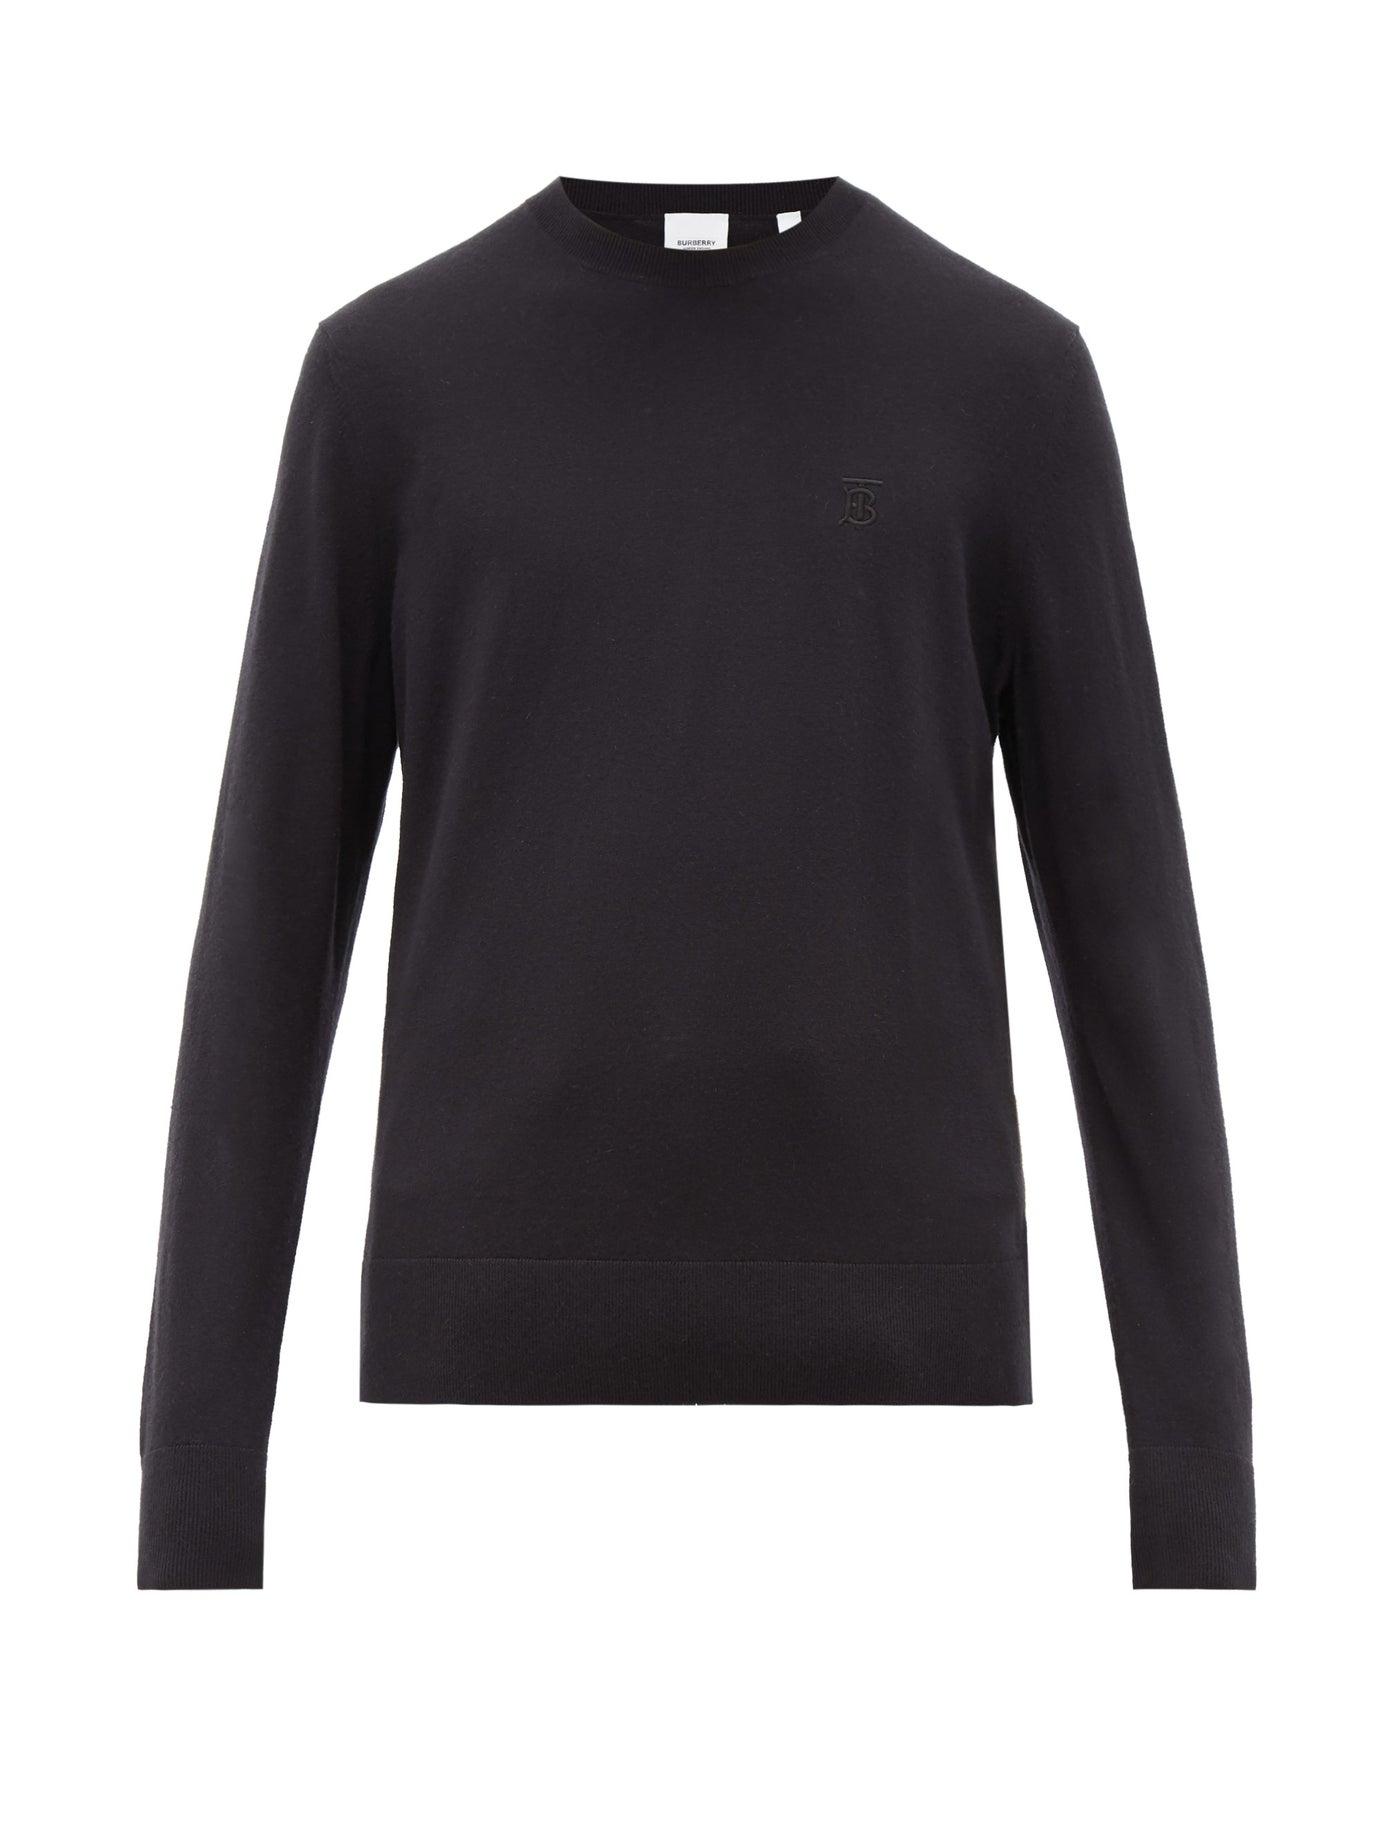 Burberry Embroidered Tb Monogram Cashmere Sweater in Black for Men - Lyst